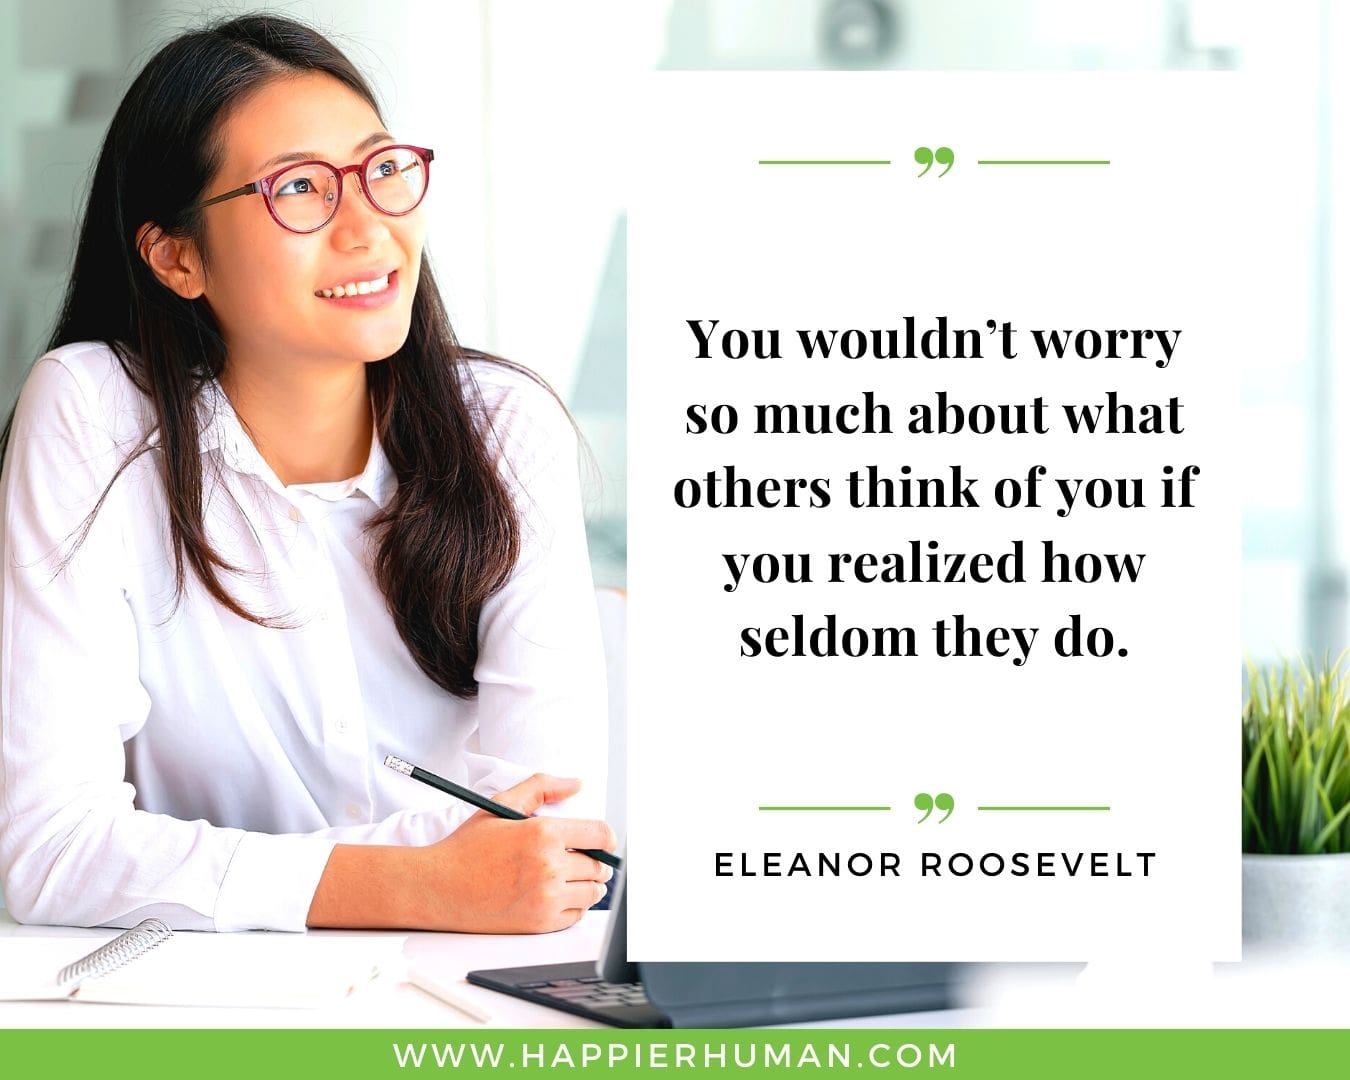 Overthinking Quotes - “You wouldn’t worry so much about what others think of you if you realized how seldom they do.” - Eleanor Roosevelt